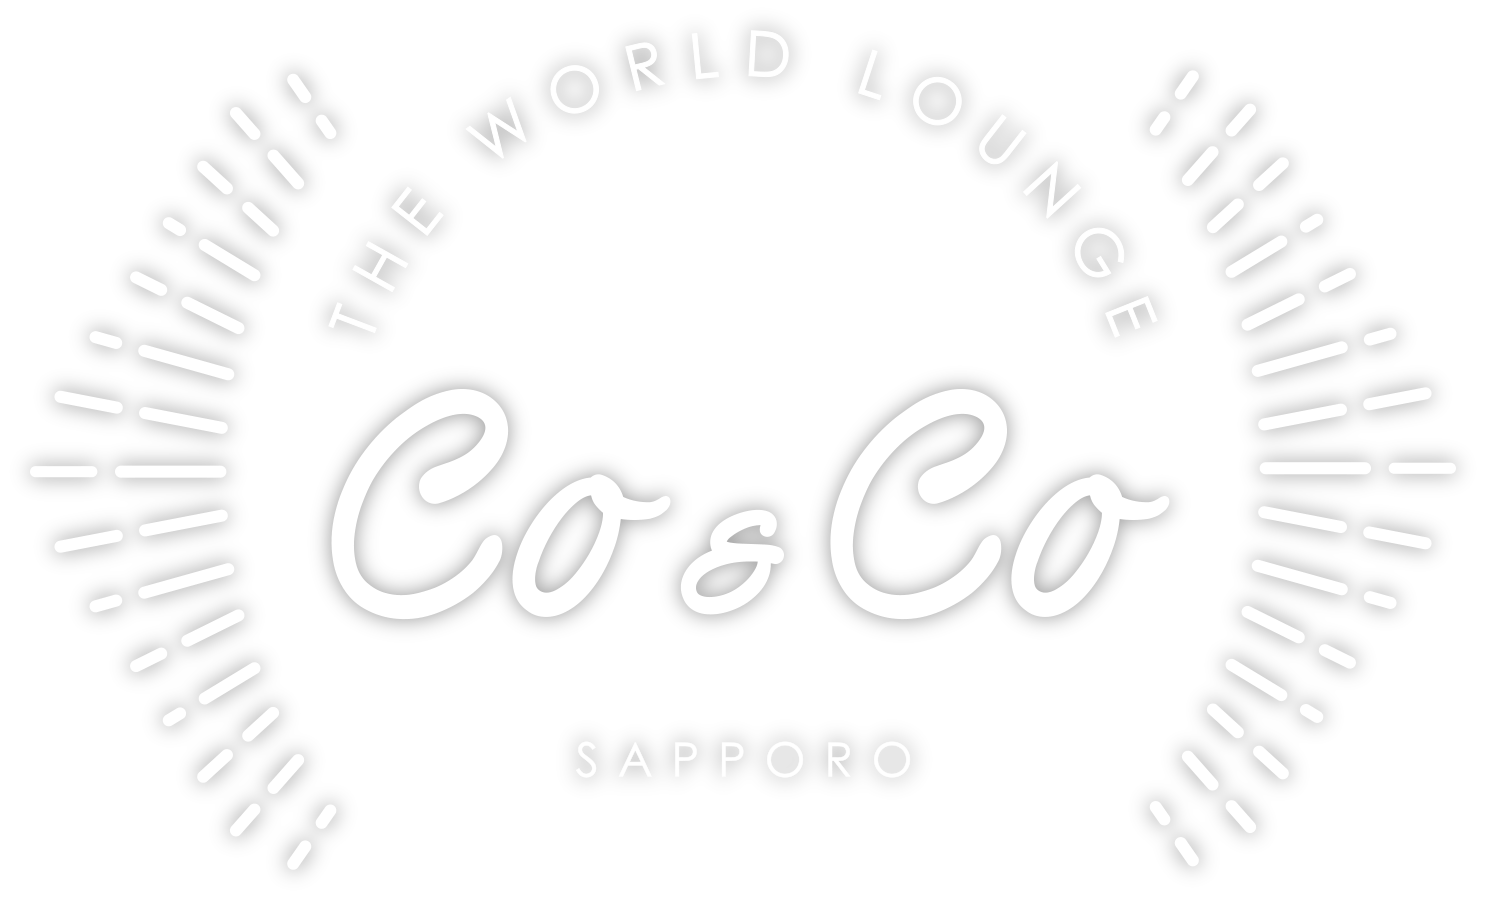 The World Lounge Co&Co Sapporo